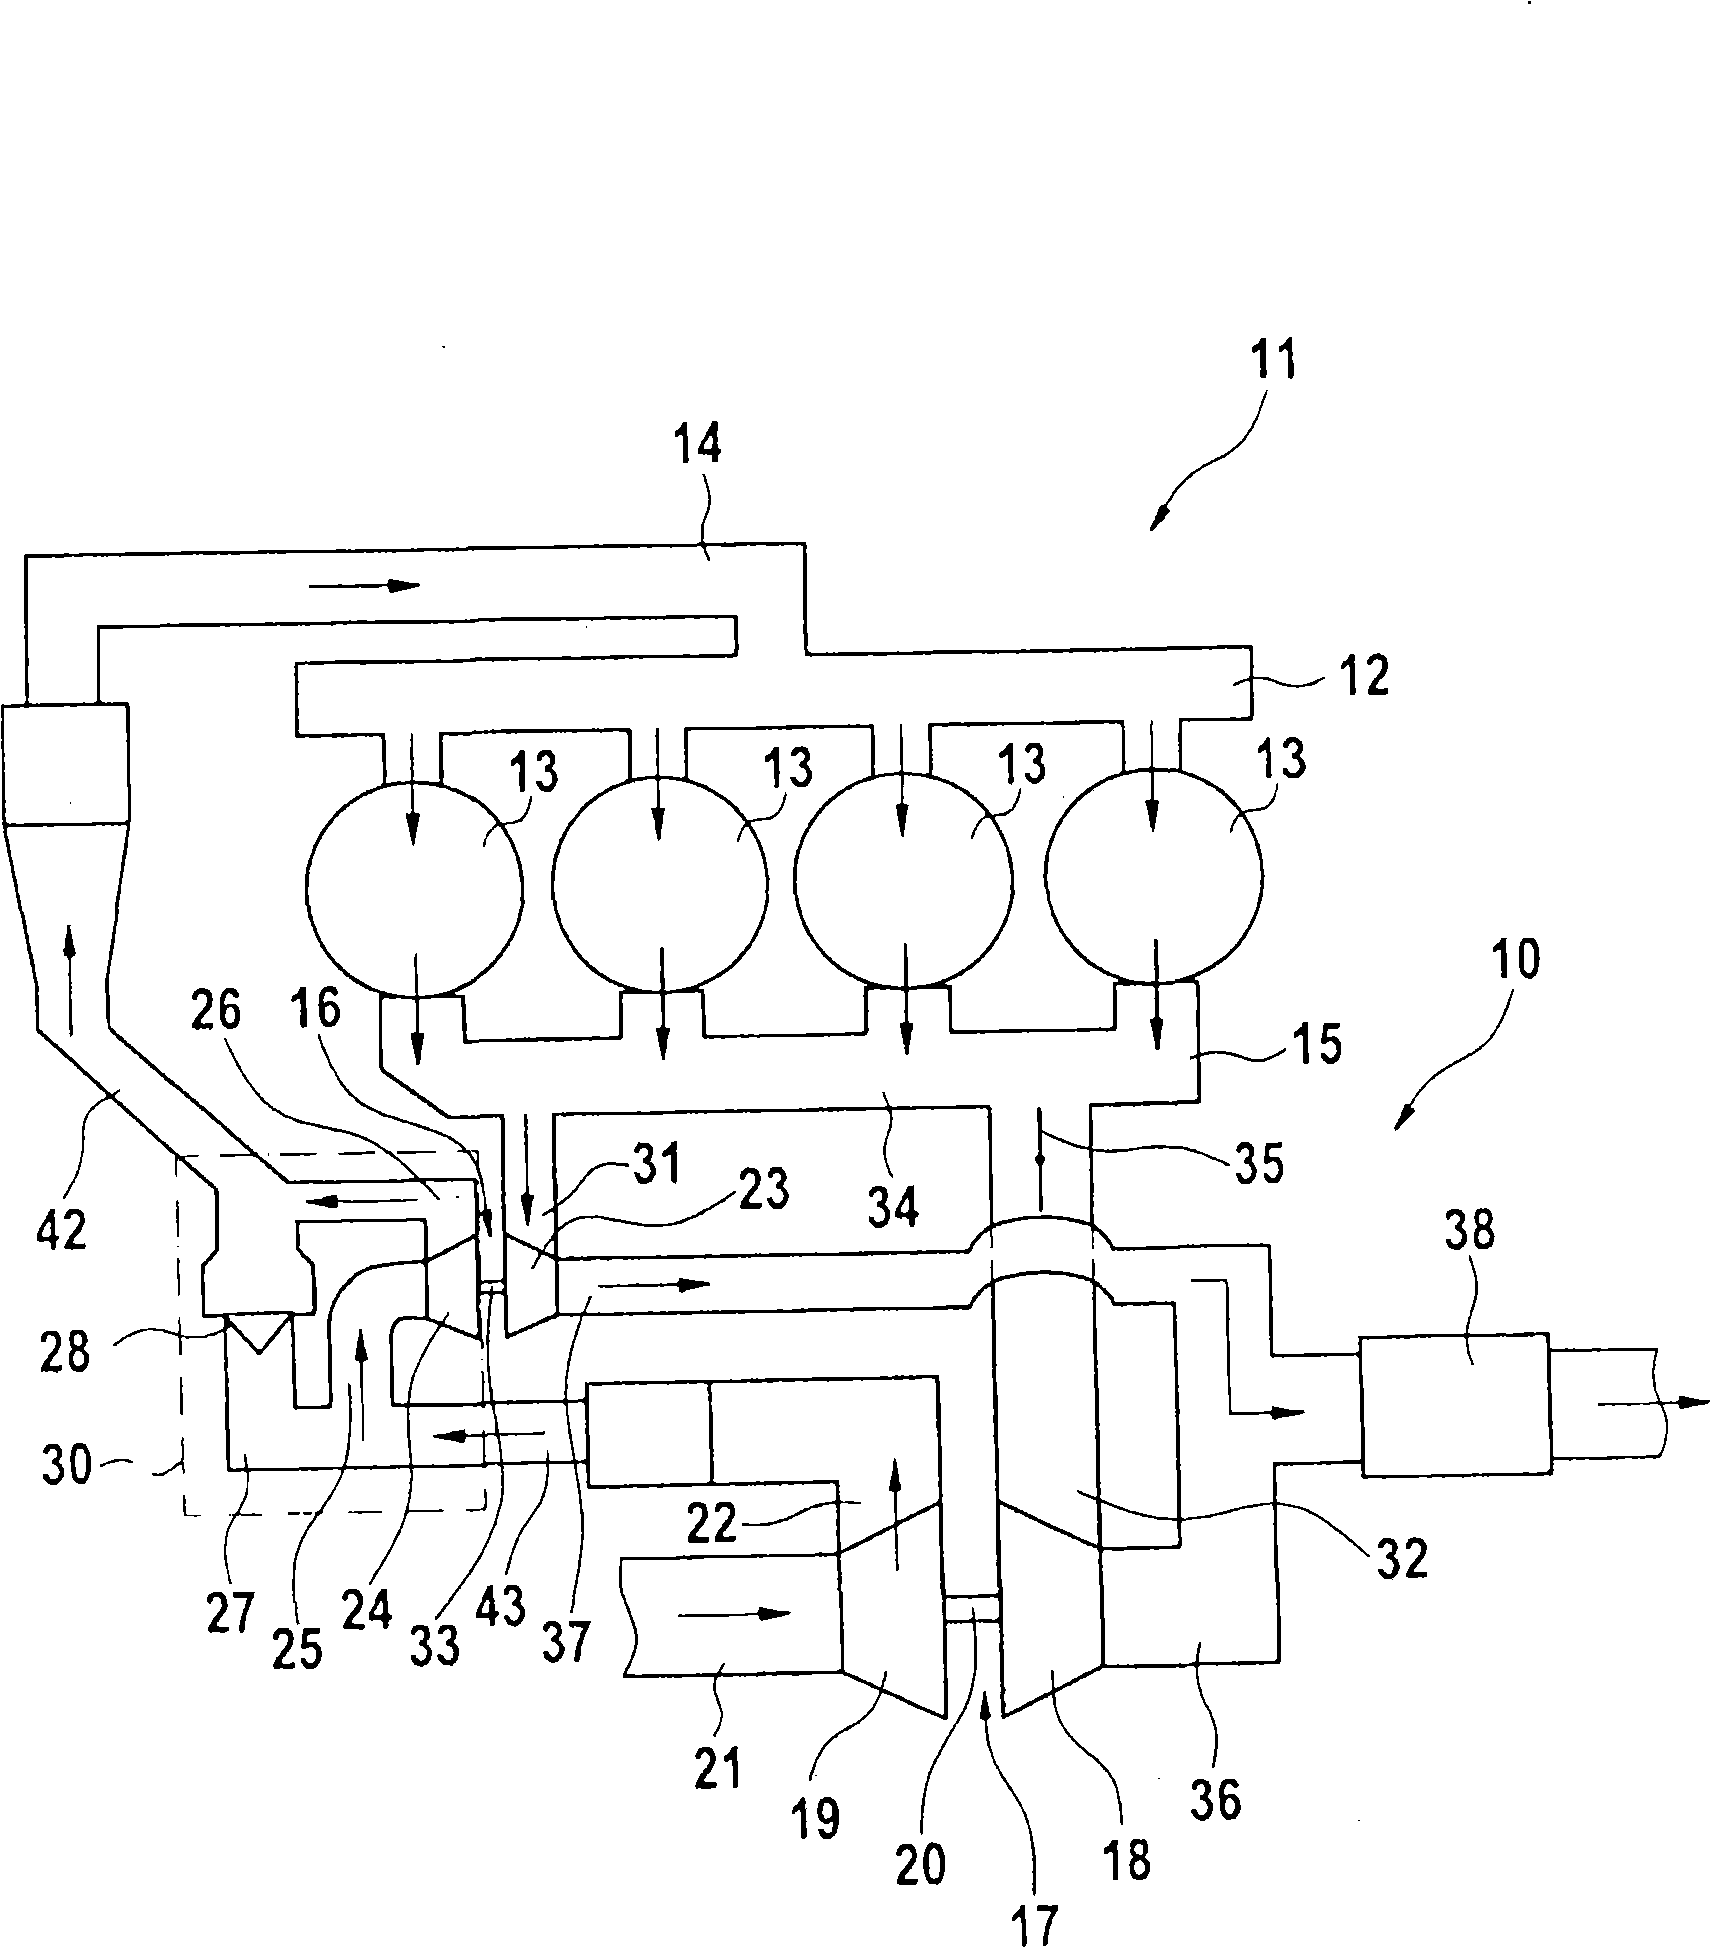 Arrangement of a two stage turbocharger system for an internal combustion engine